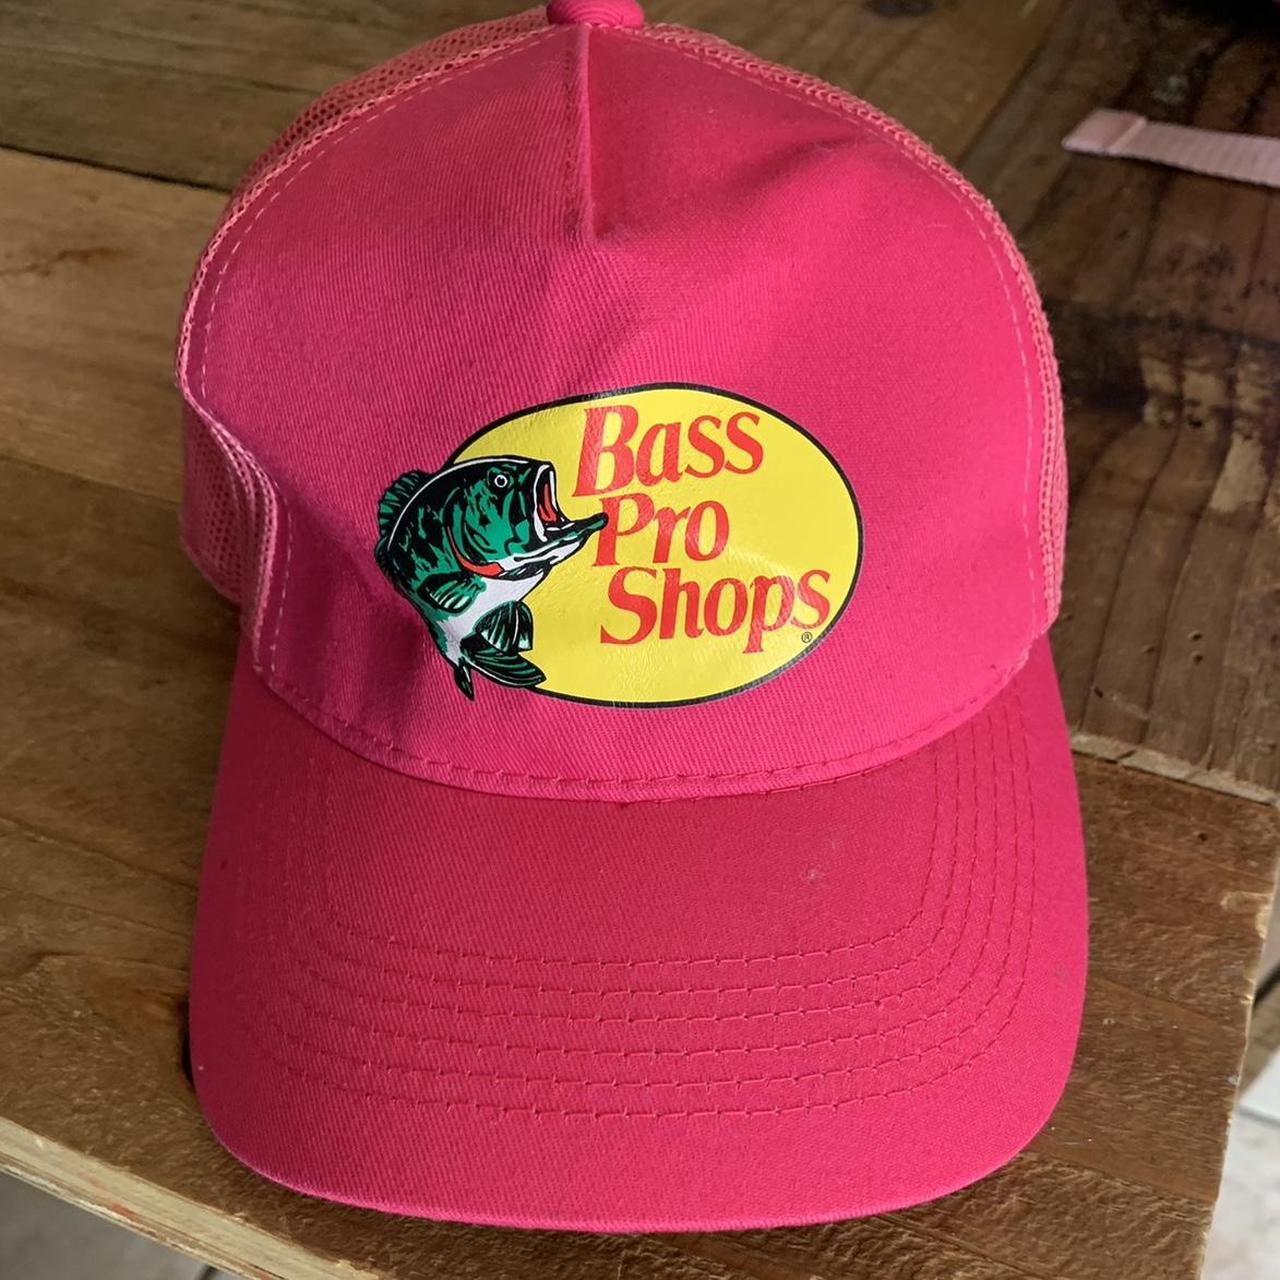 Where to Find Preppy Bass Pro Shop Hats